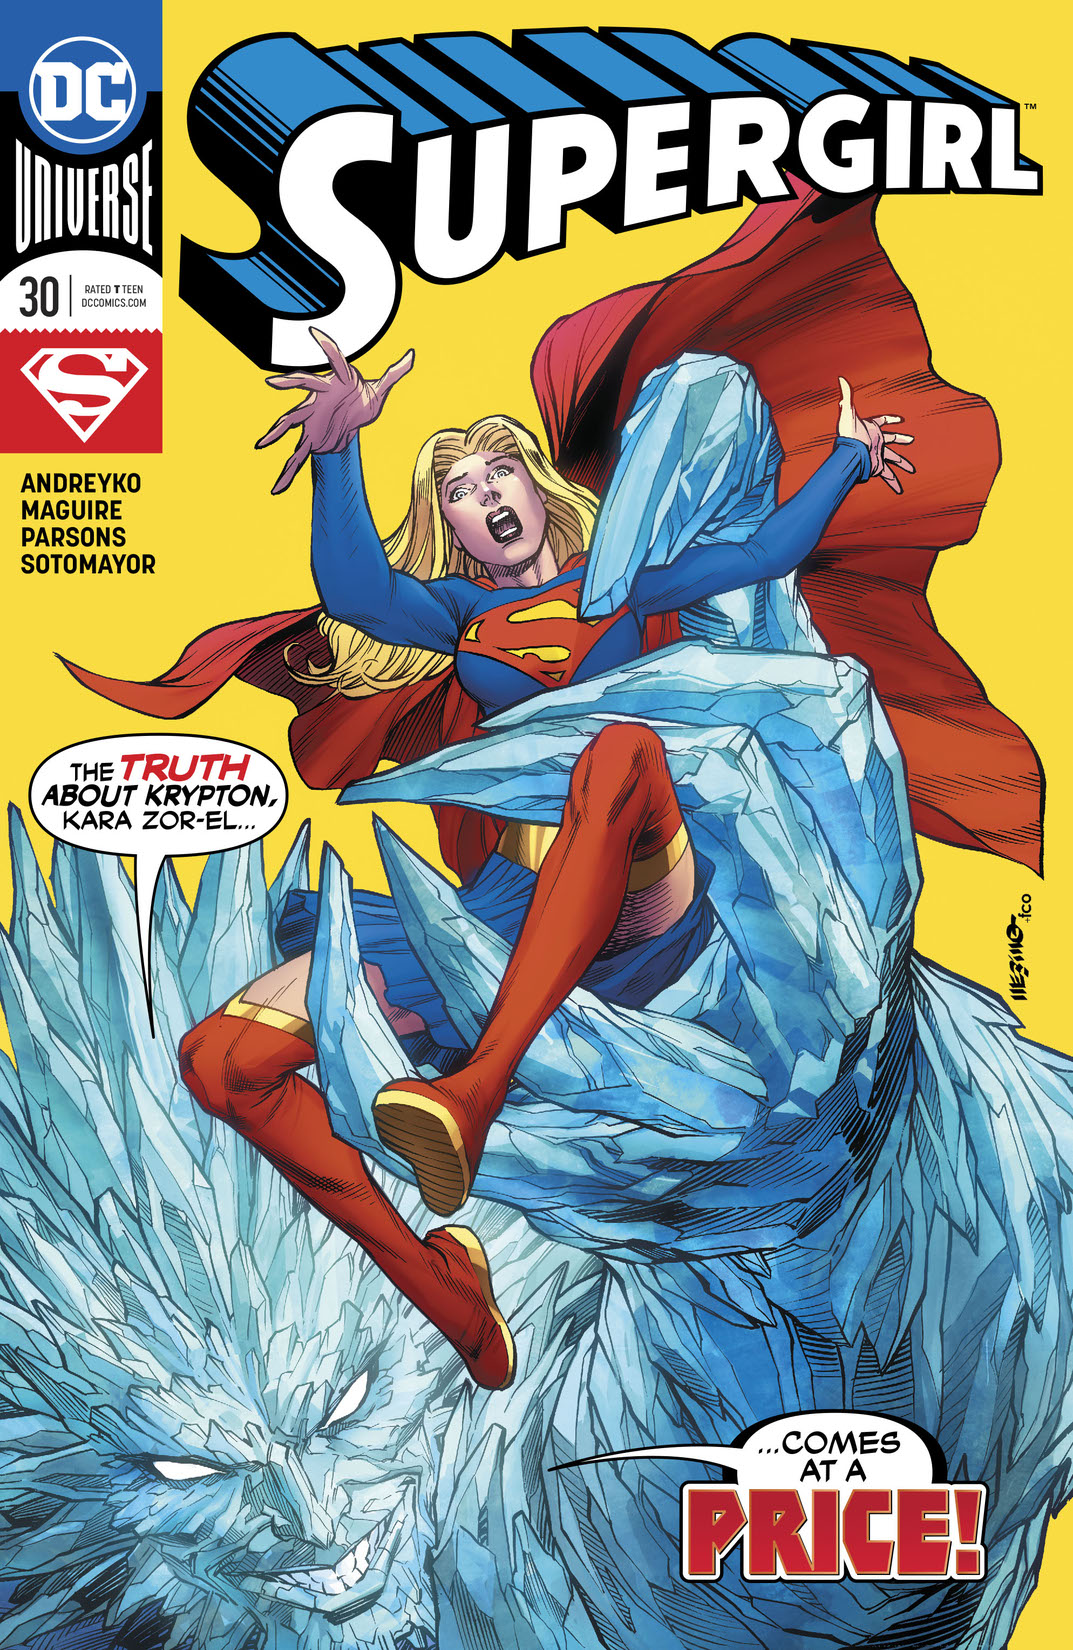 Supergirl (2016-) #30 preview images